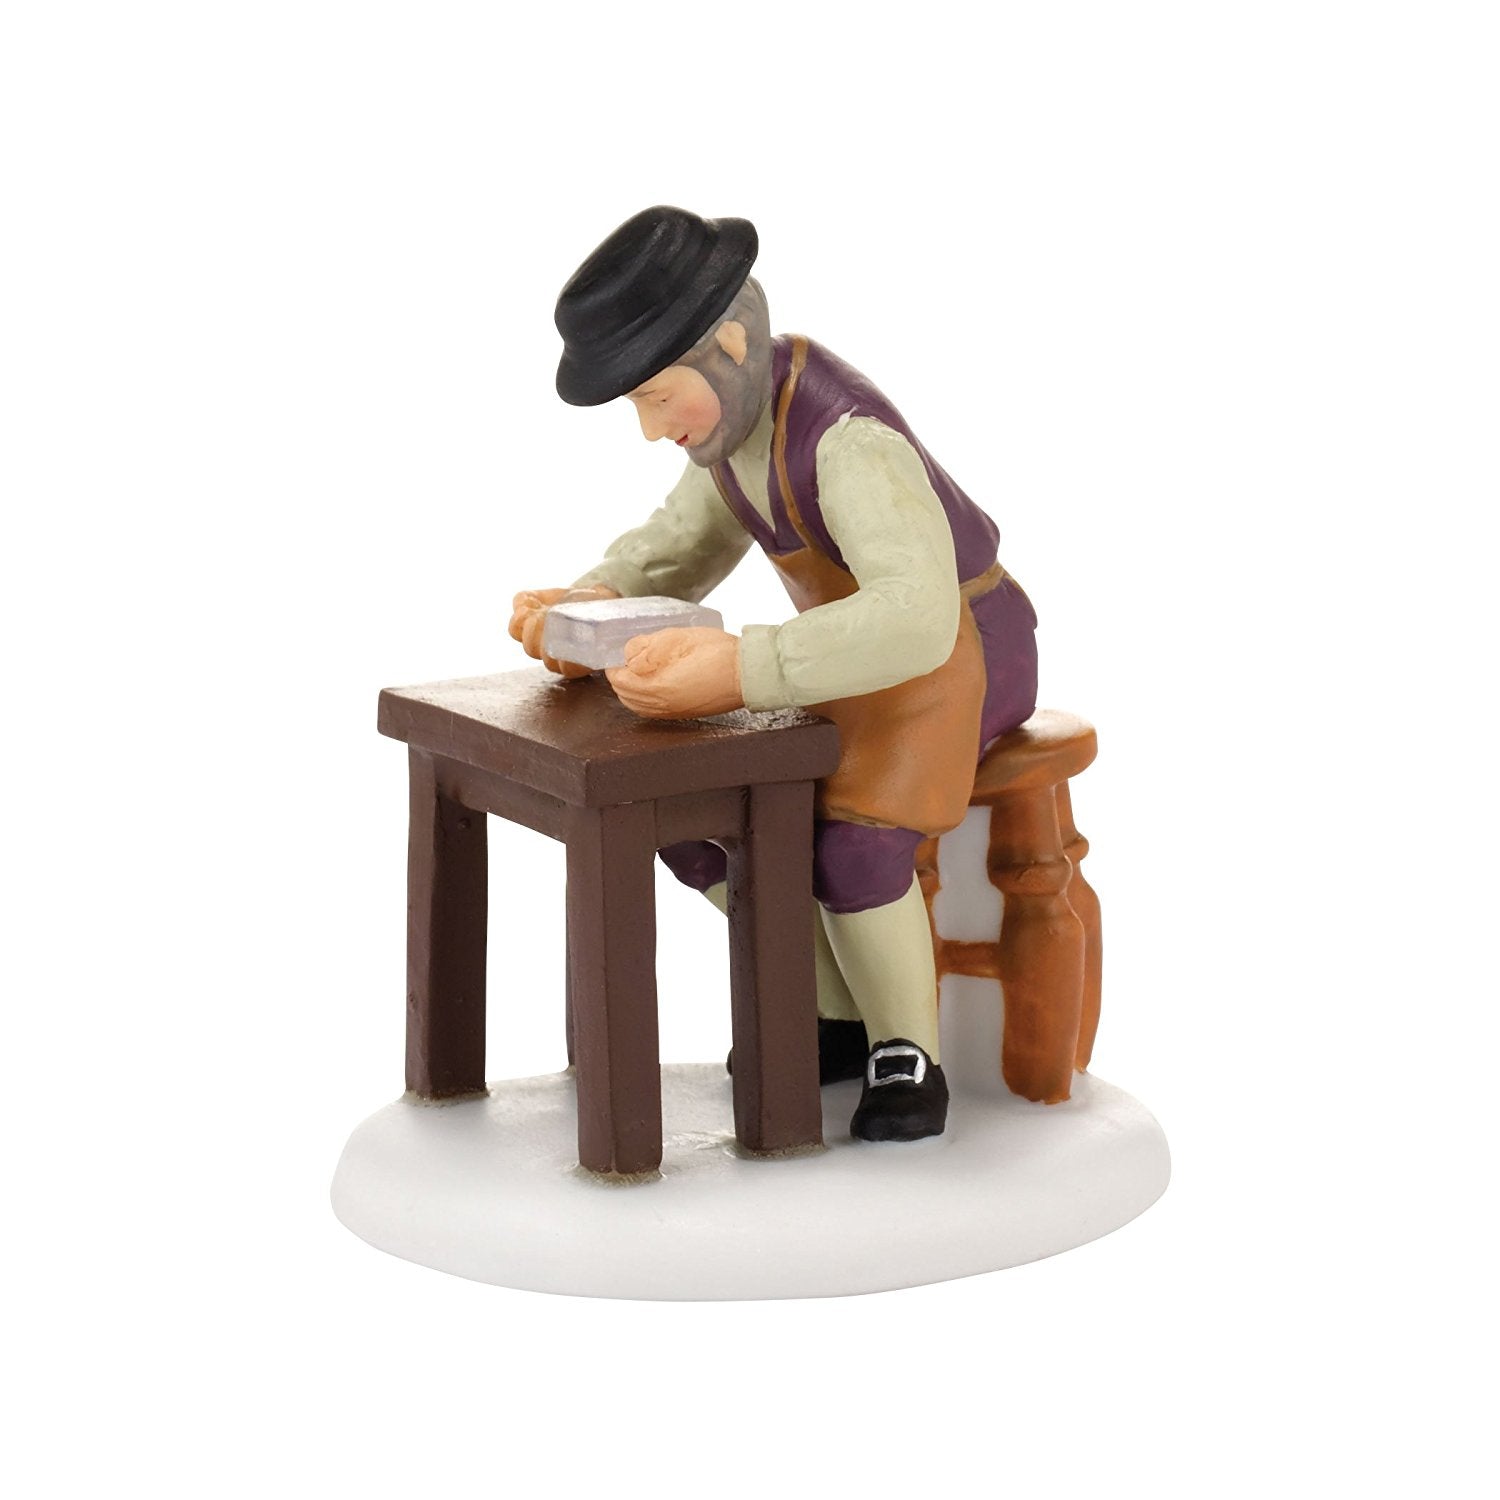 Department 56 New England Village The Light Keeper's Hobby Accessory Figurine, 2.37 inch